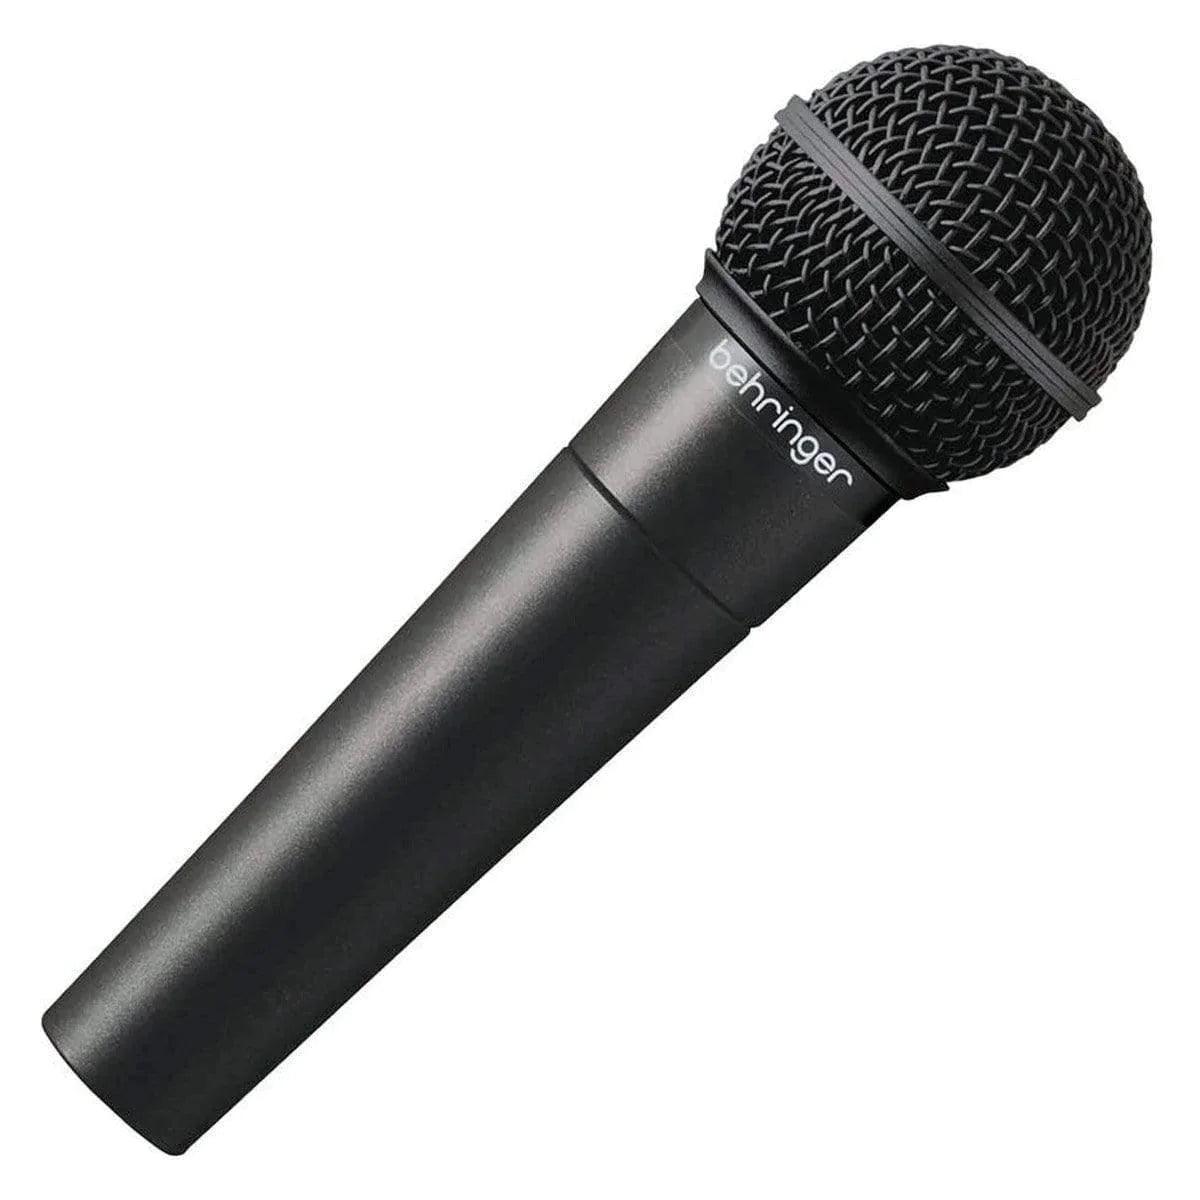 Behringer Ultravoice XM8500 Dynamic Cardioid Vocal Microphone